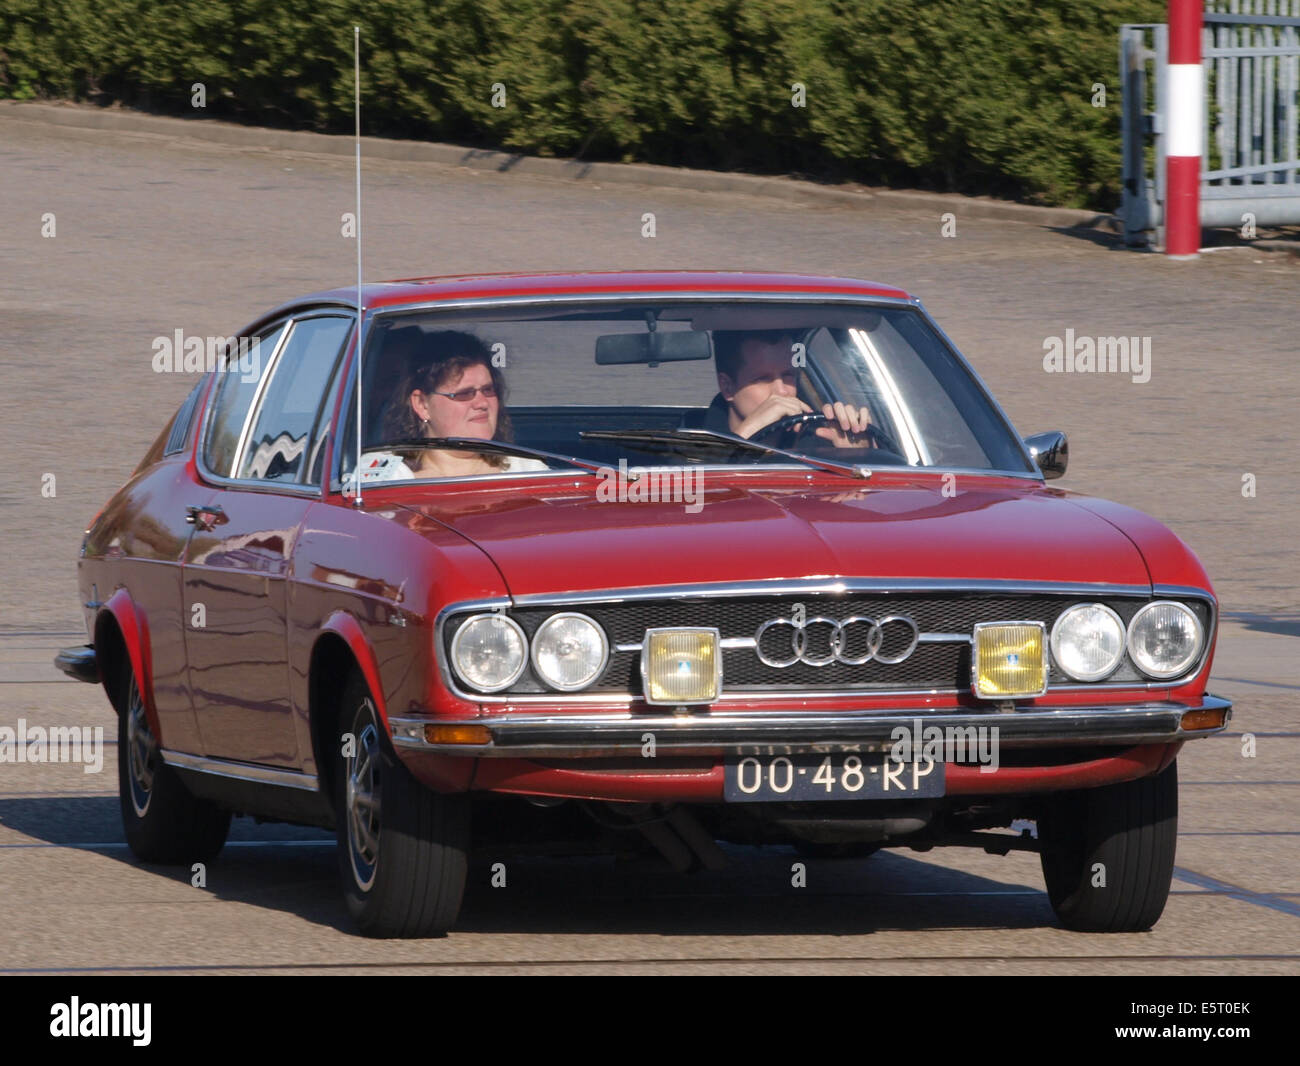 Audi 100 Coupe S, build in 1977, Dutch licence registration 00-48-RP, at IJmuiden, The Netherlands, pic3 Stock Photo